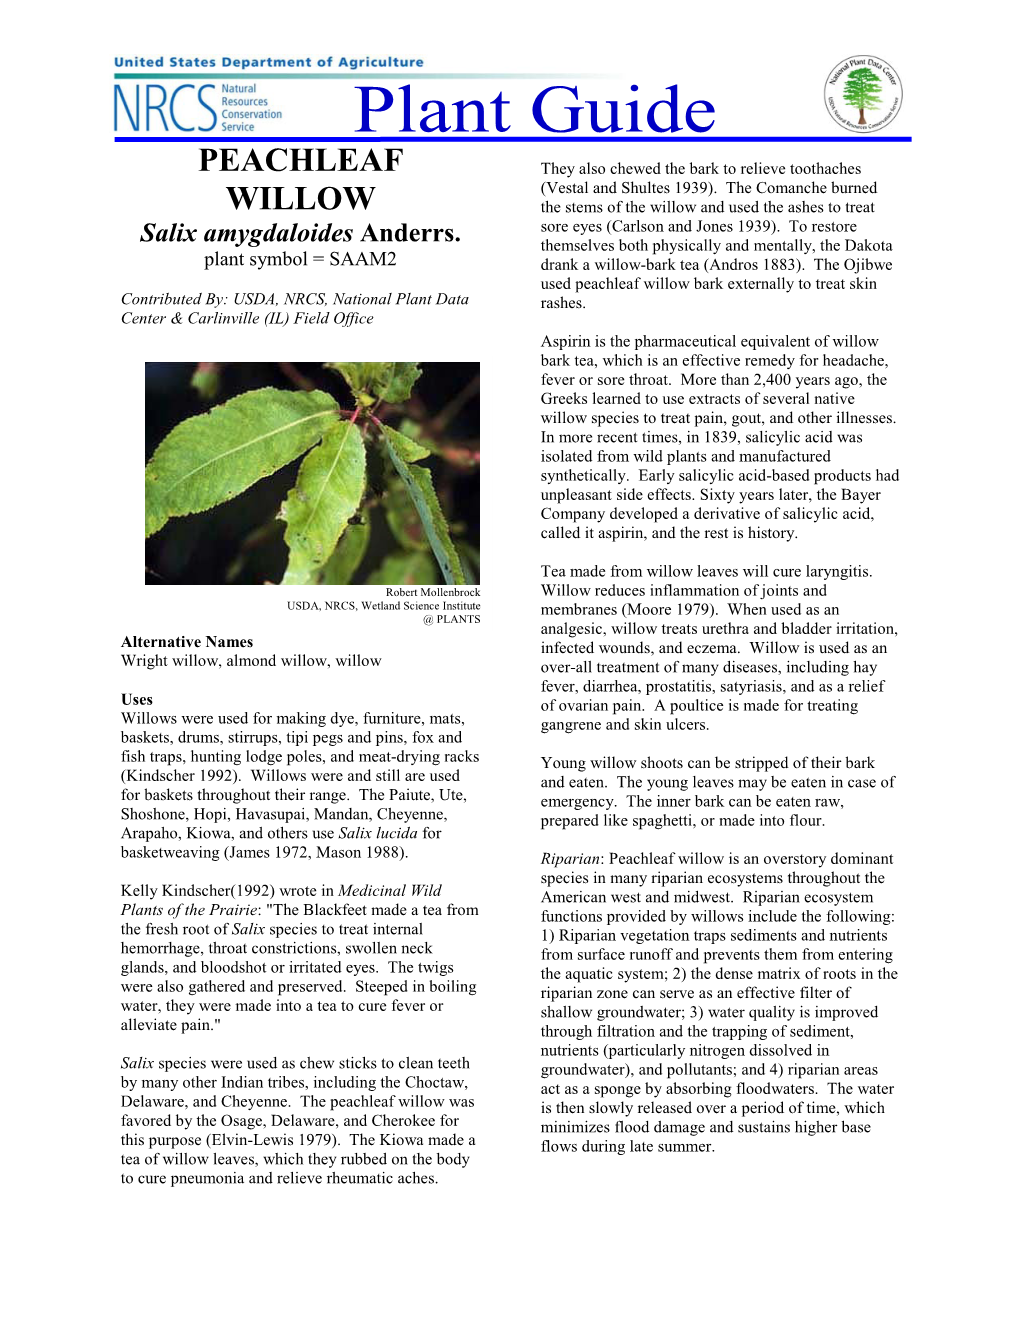 Peachleaf Willow Bark Externally to Treat Skin Contributed By: USDA ...